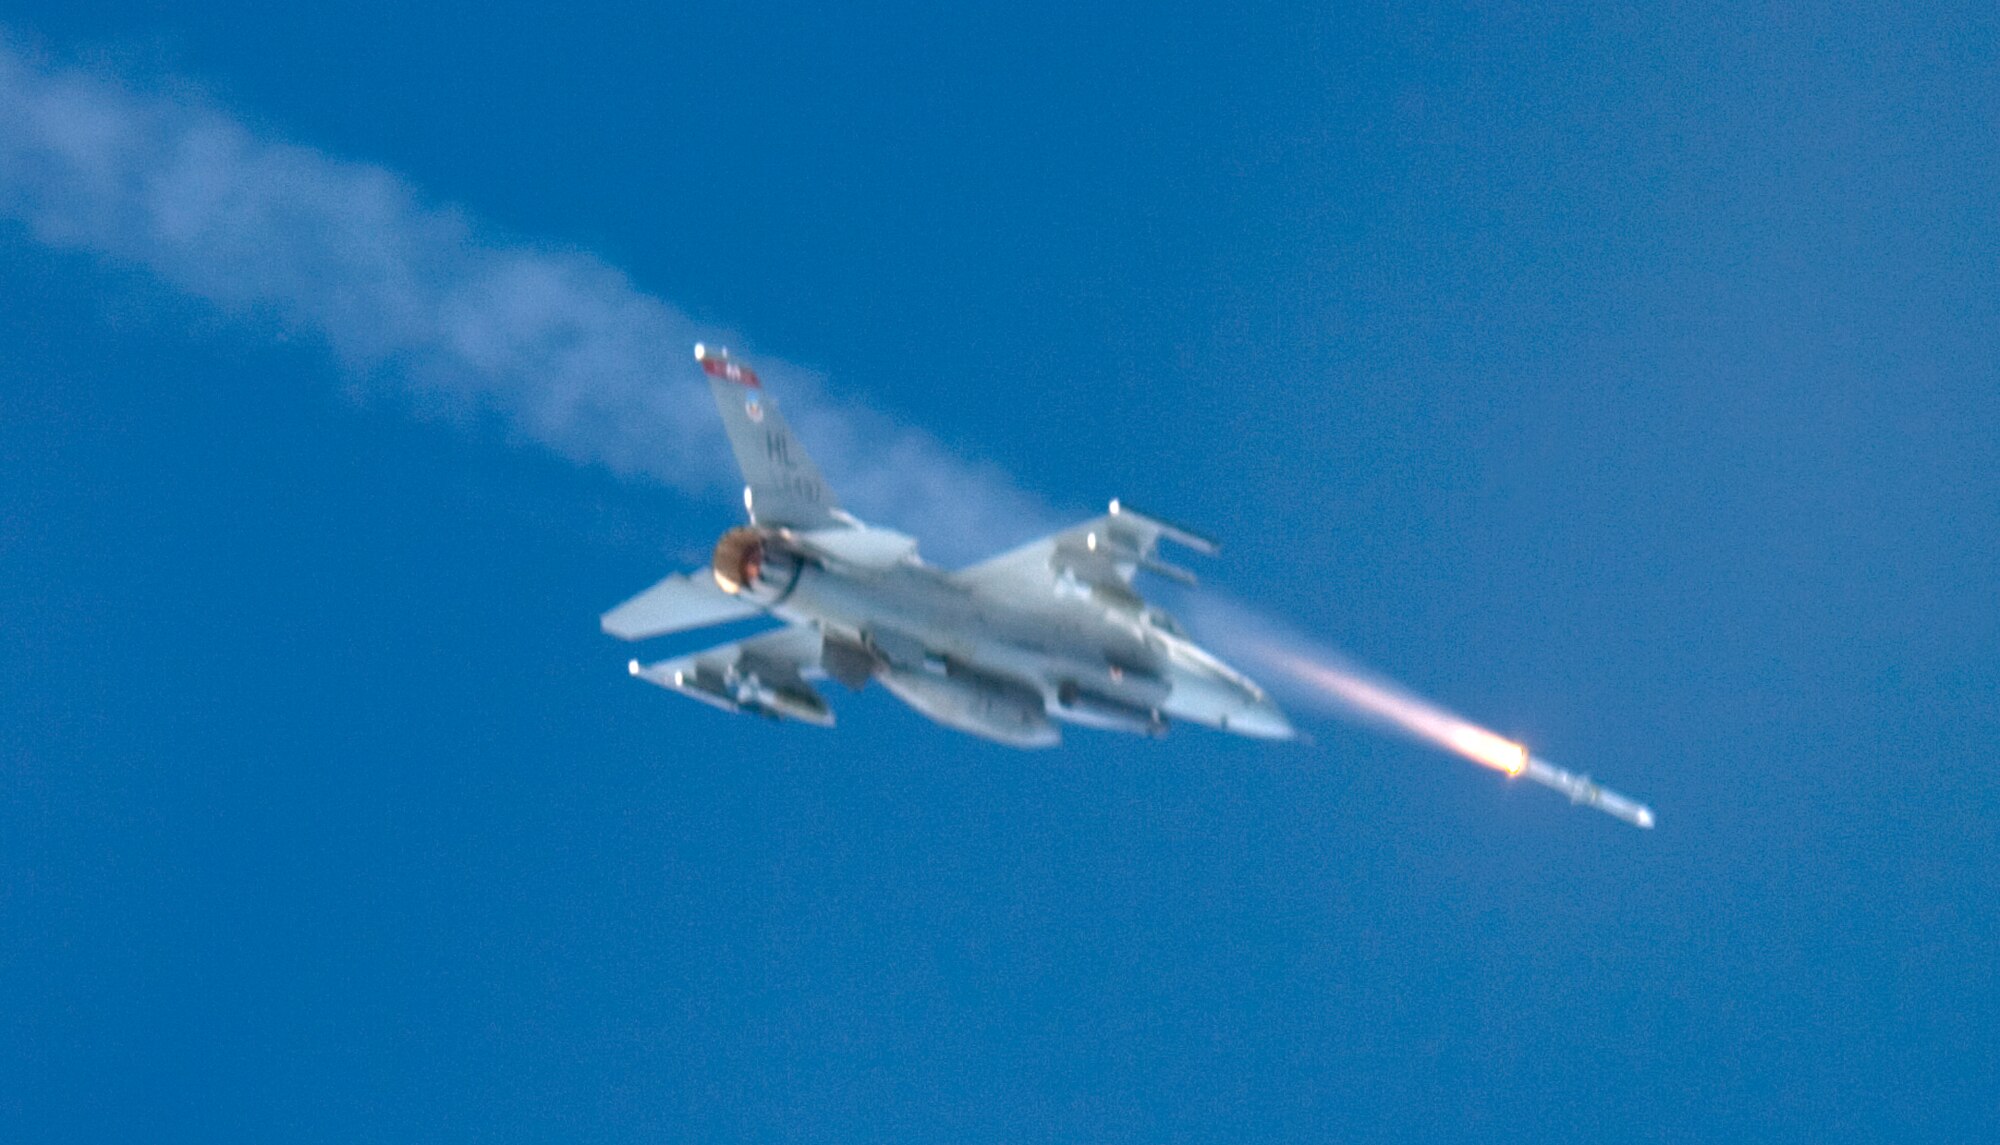 A F-16 Fighting Falcon from the 34th Fighter Squadron at Hill Air Force Base, Utah, fires a missile  at a airborne drone over the Gulf of Mexico Jan 14, during the Combat Archer portion of a mission.  The 34 FS participated in the first-ever combined Weapons System Evaluation Program.  This WSEP combined the live air-to-air missile firing of Combat Archer and the air-to-ground bomb drops of Combat Hammer into one continuous mission.  This major undertaking brought together the WSEP evaluators from the 83rd Fighter Weapons Squadron, located at Tyndall Air Force Base, Fla., and the 86th Fighter Weapons Squadron at Eglin.  This new combined mission began with the aircraft load and launch from Tyndall.  Then the pilot performed a live missile firing over the Gulf of Mexico.  After the missile launch, the pilot connected with a KC-135 Stratotanker from MacDill Air Force Base, Fla., for refueling.  Then, the pilot flew over the Eglin range to perform a live bomb drop.  (U.S. Air Force photo\Tech Sgt. Jason Wilkerson.)